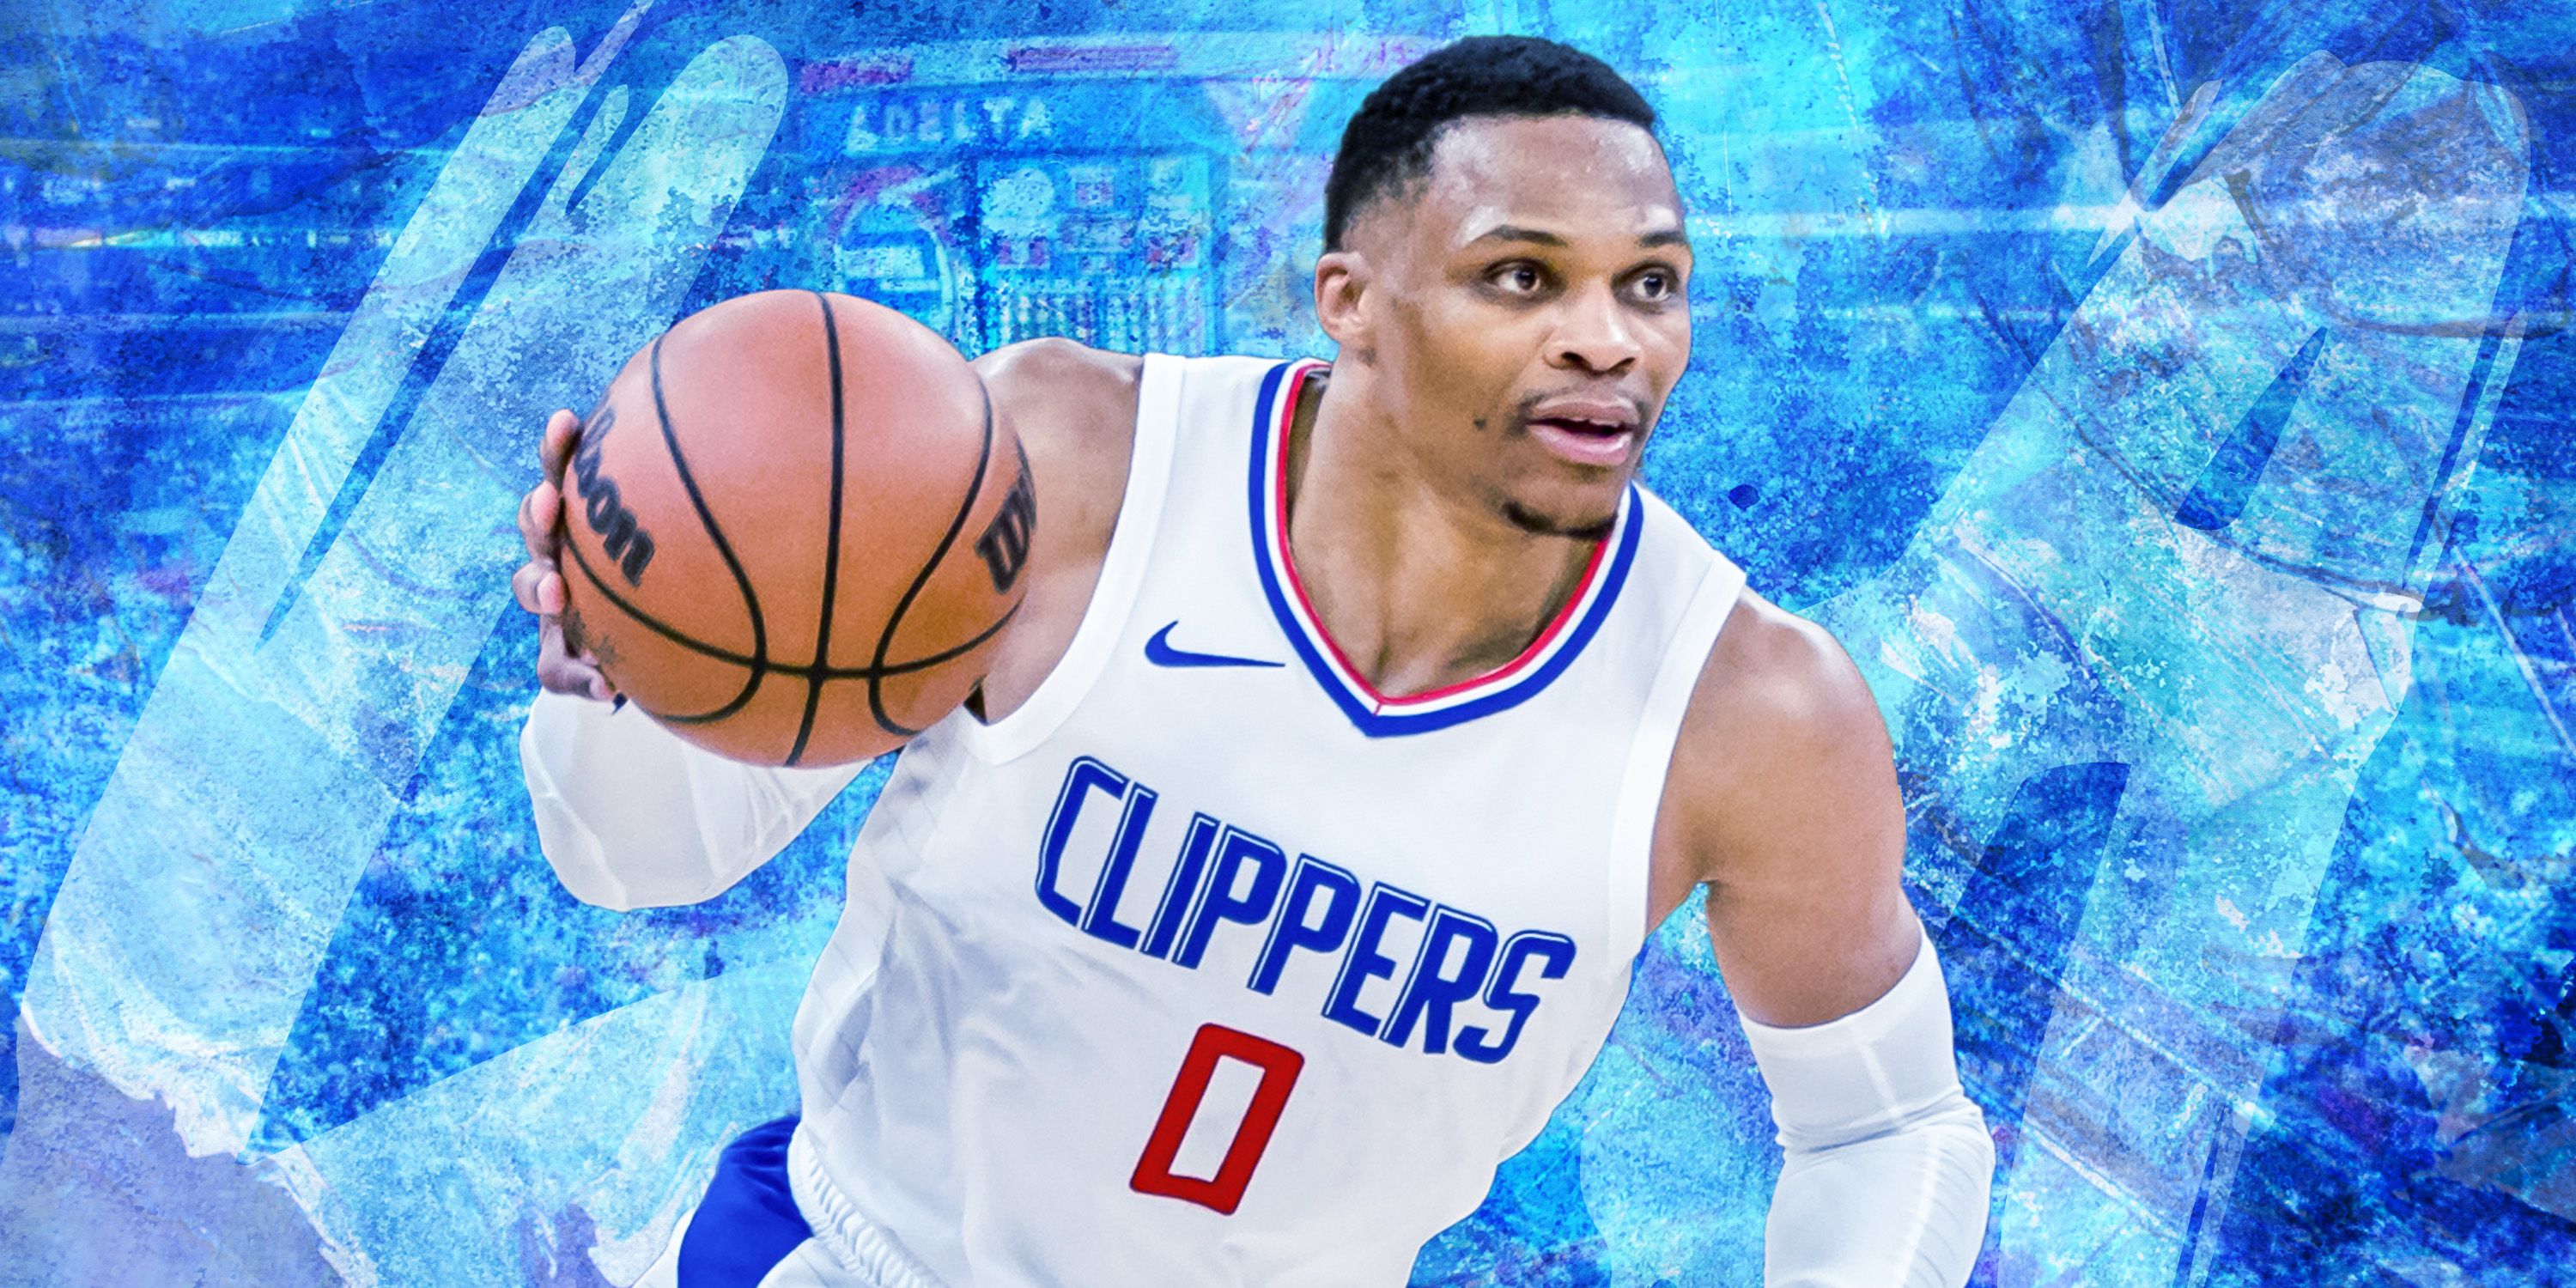 NBA_Westbrook Clippers